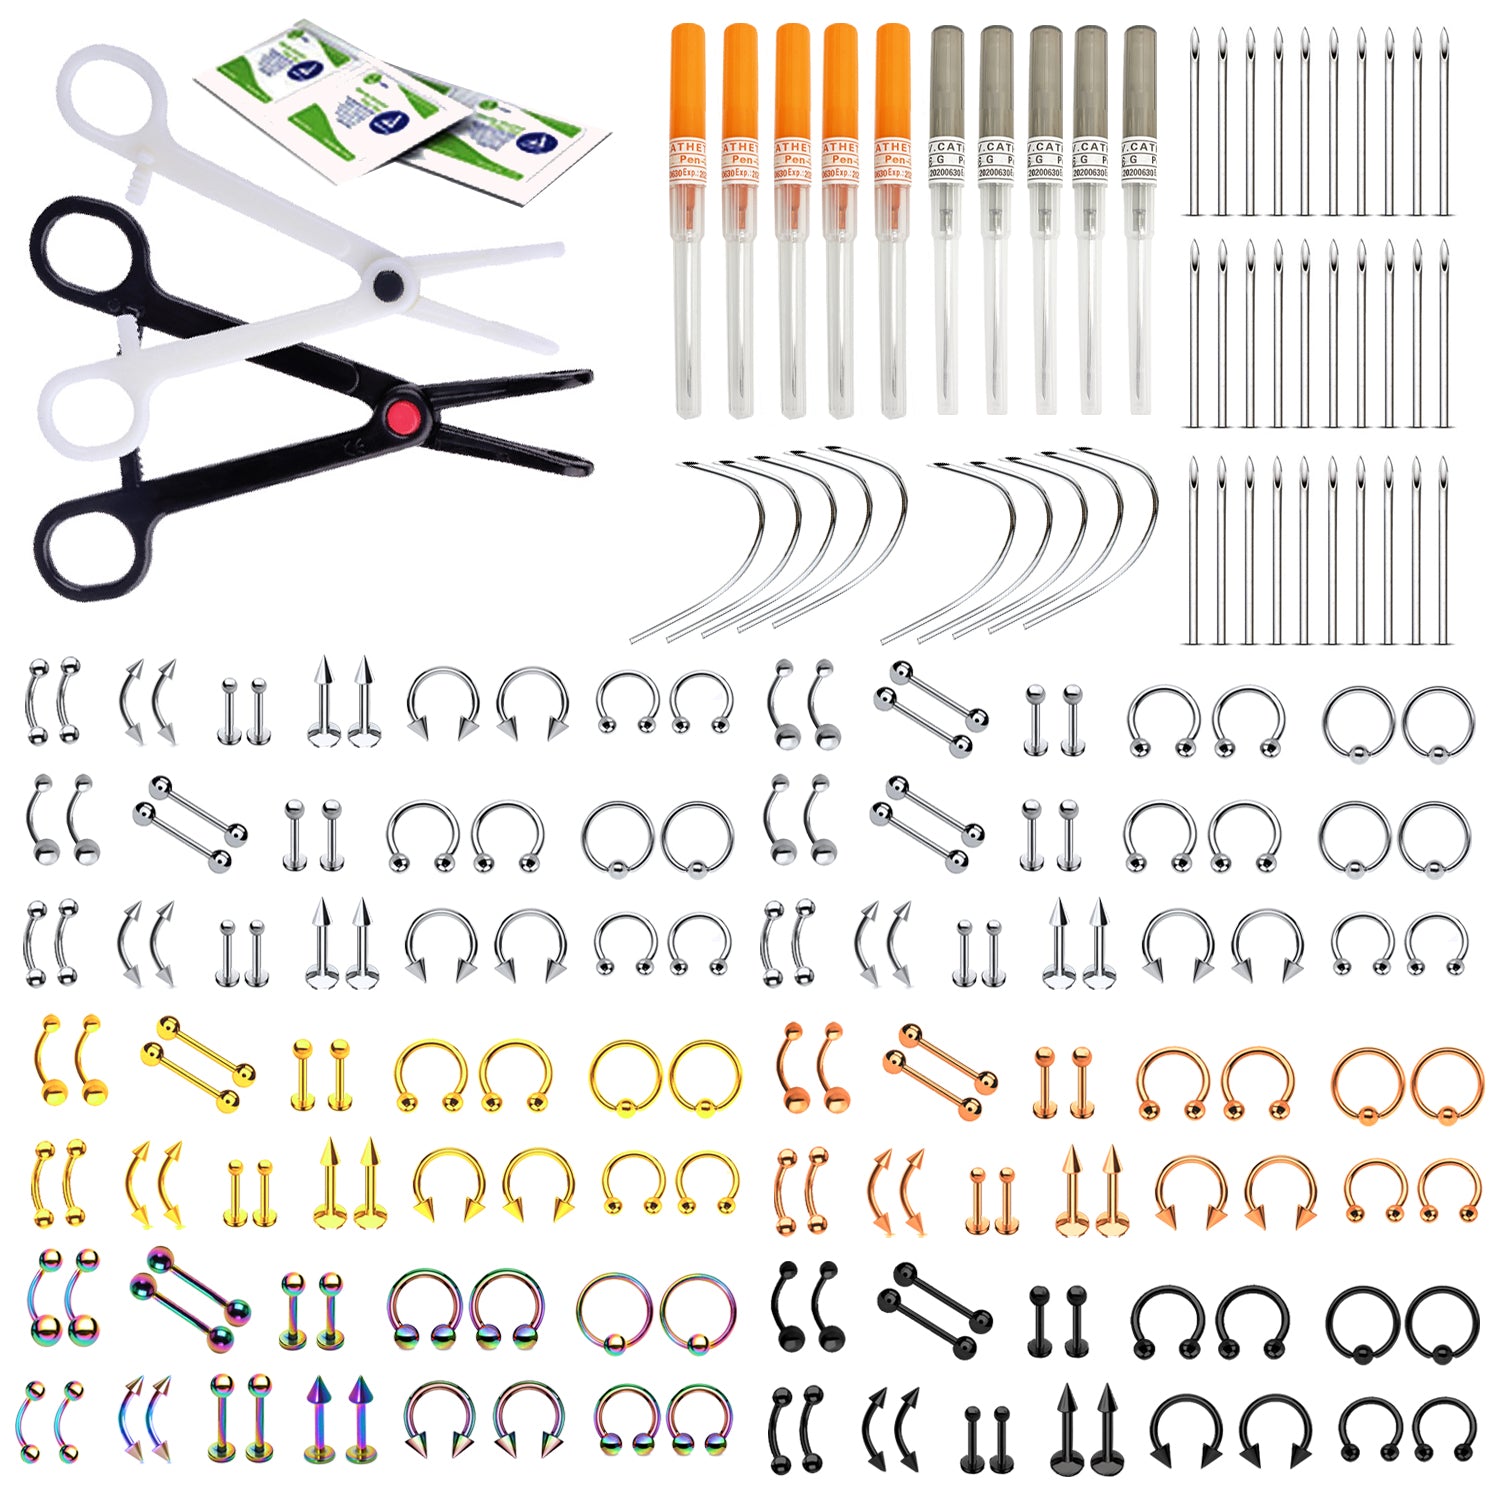 Muross 84PCS Piercing Jewelry Kit Pro Piercing Kit Belly Ring Tongue Tragus  Nose Eyebrow Piercing Tools Piercing Needles Clamps 